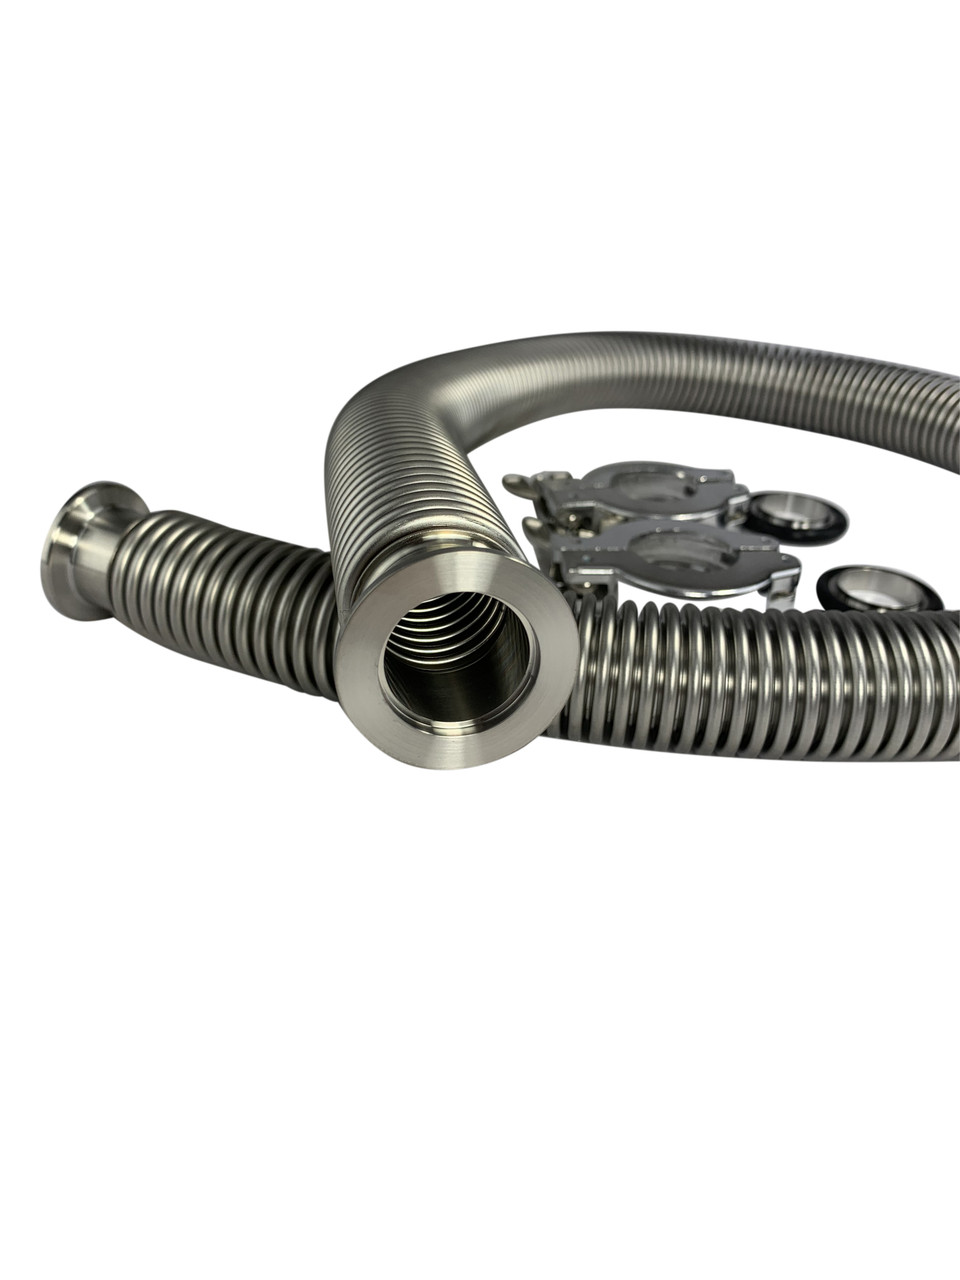 NW25 x 40" Thin-walled (.008) Stainless Steel Vacuum Hose